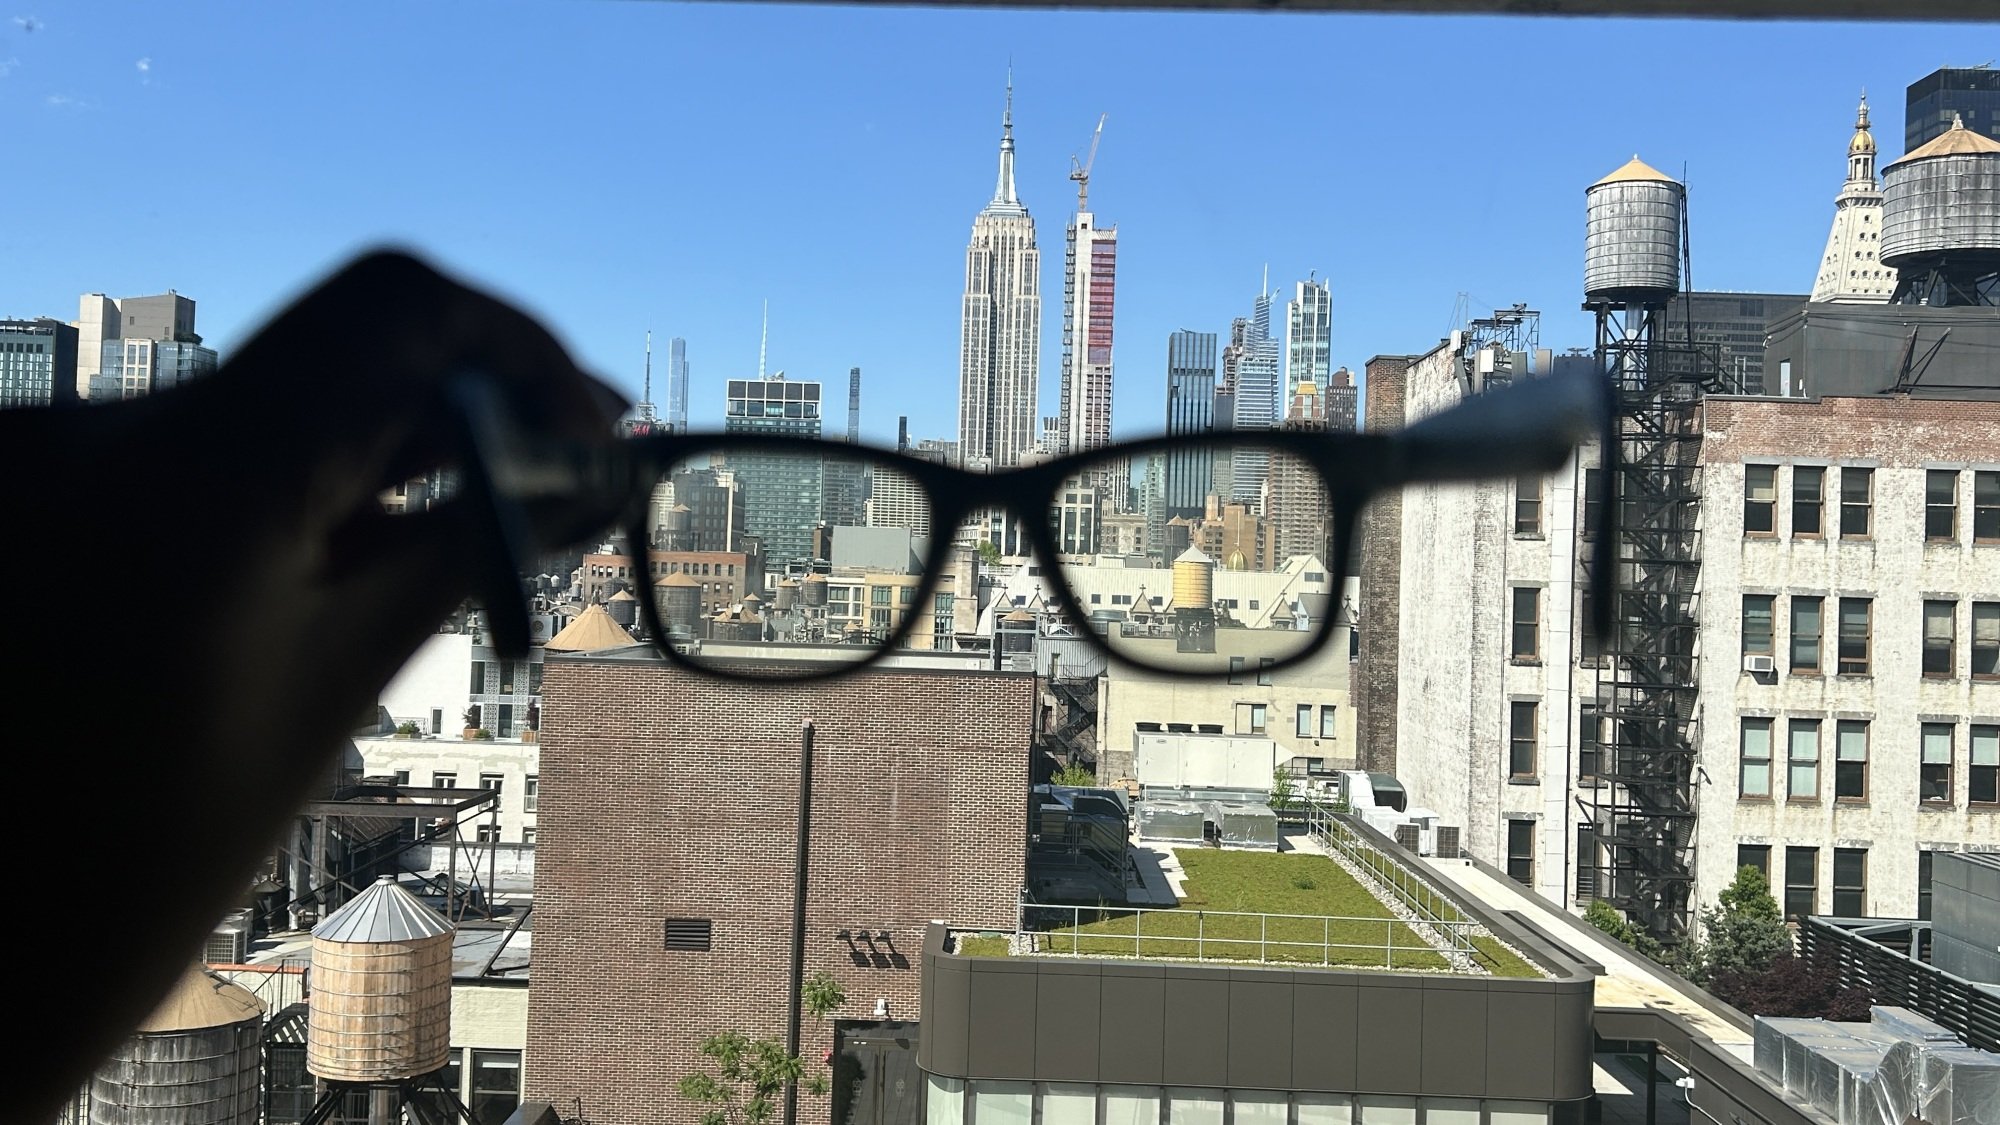 Ray-Ban Meta Smart Glasses with Empire State Building in the background.